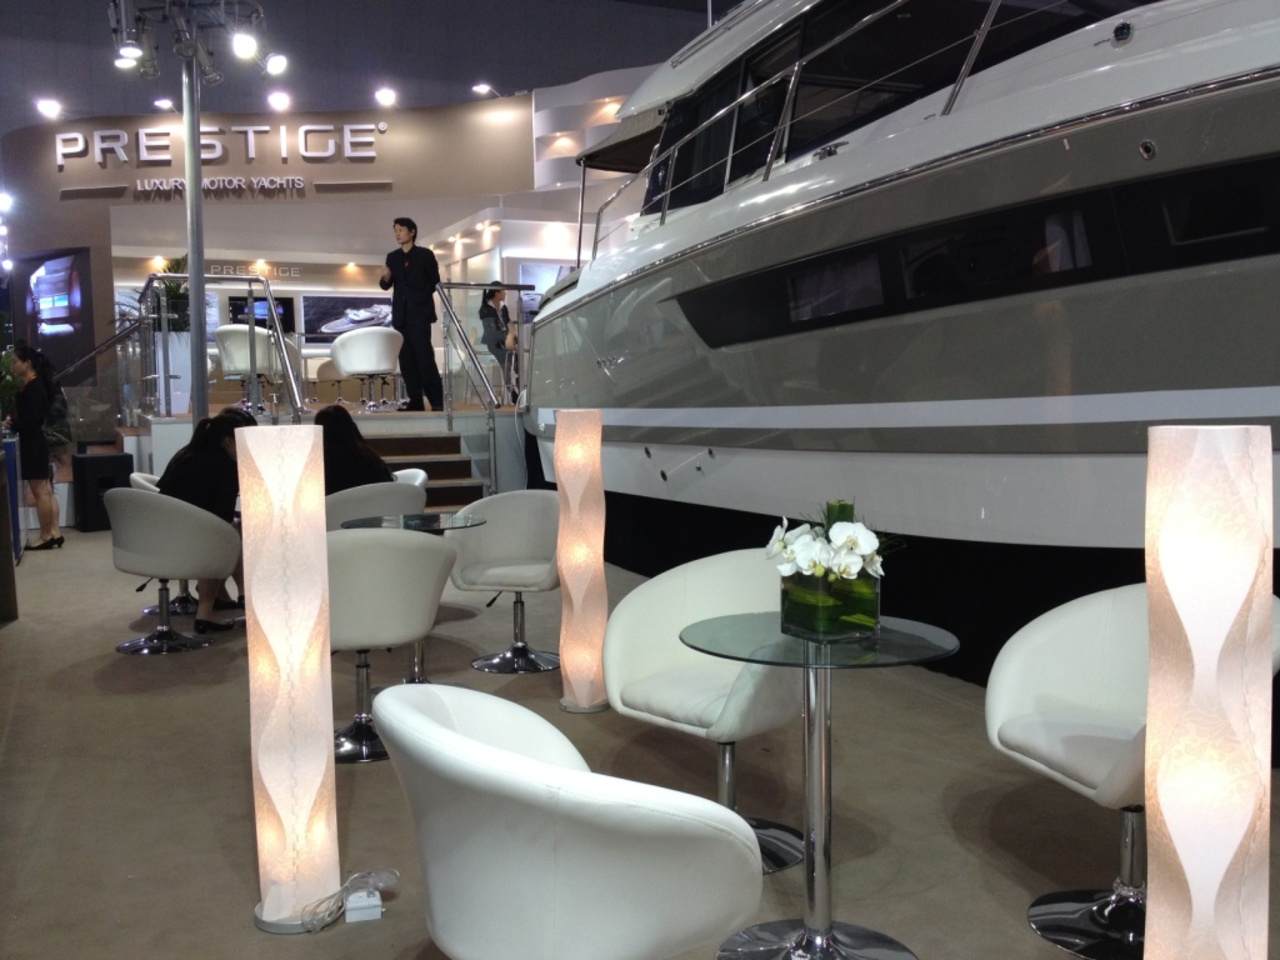 PRESTIGE AT THE SHANGHAI BOAT SHOW 1